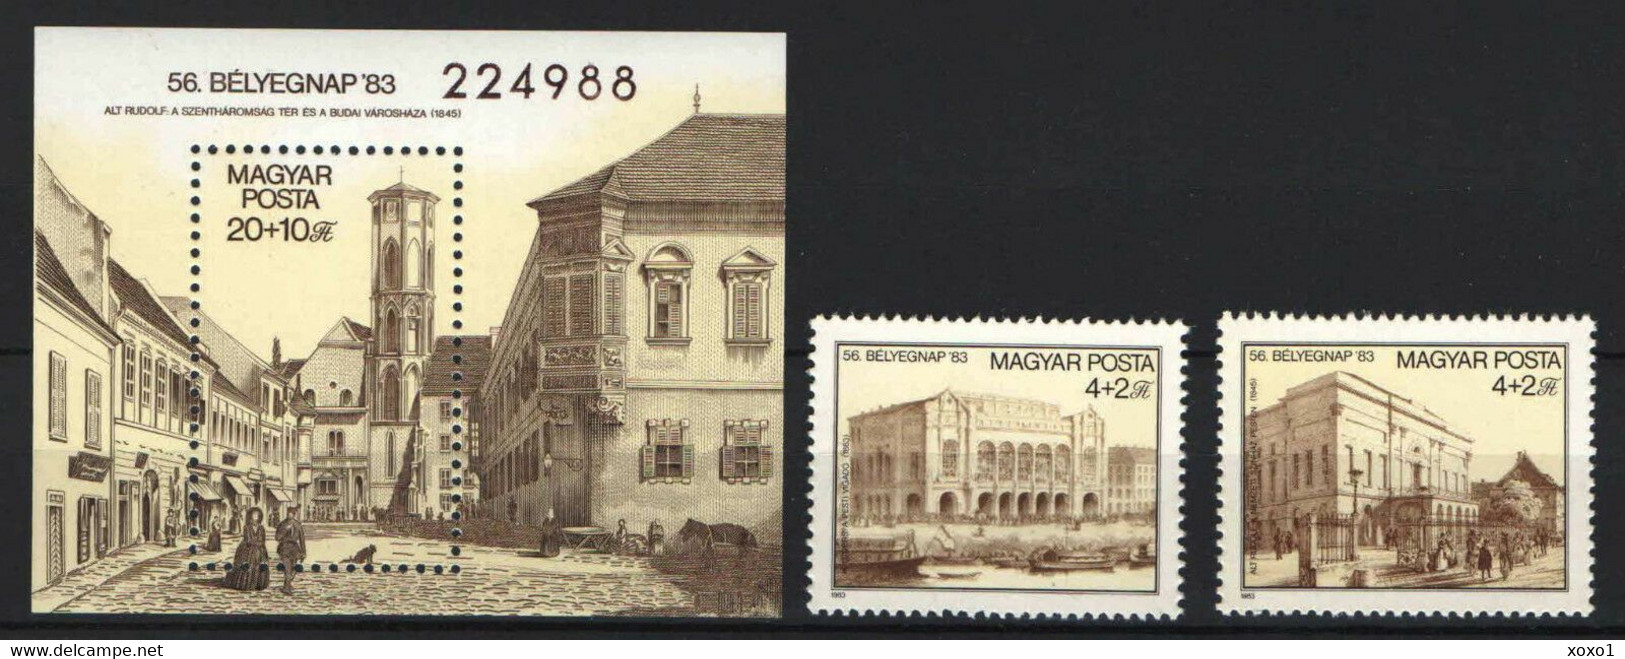 Hungary 1983 MiNr. 3632 - 3634(Block 166) Ungarn Philately Stamp's Day, Architecture, Engraving 2v + S\sh MNH ** 7.40 € - Incisioni